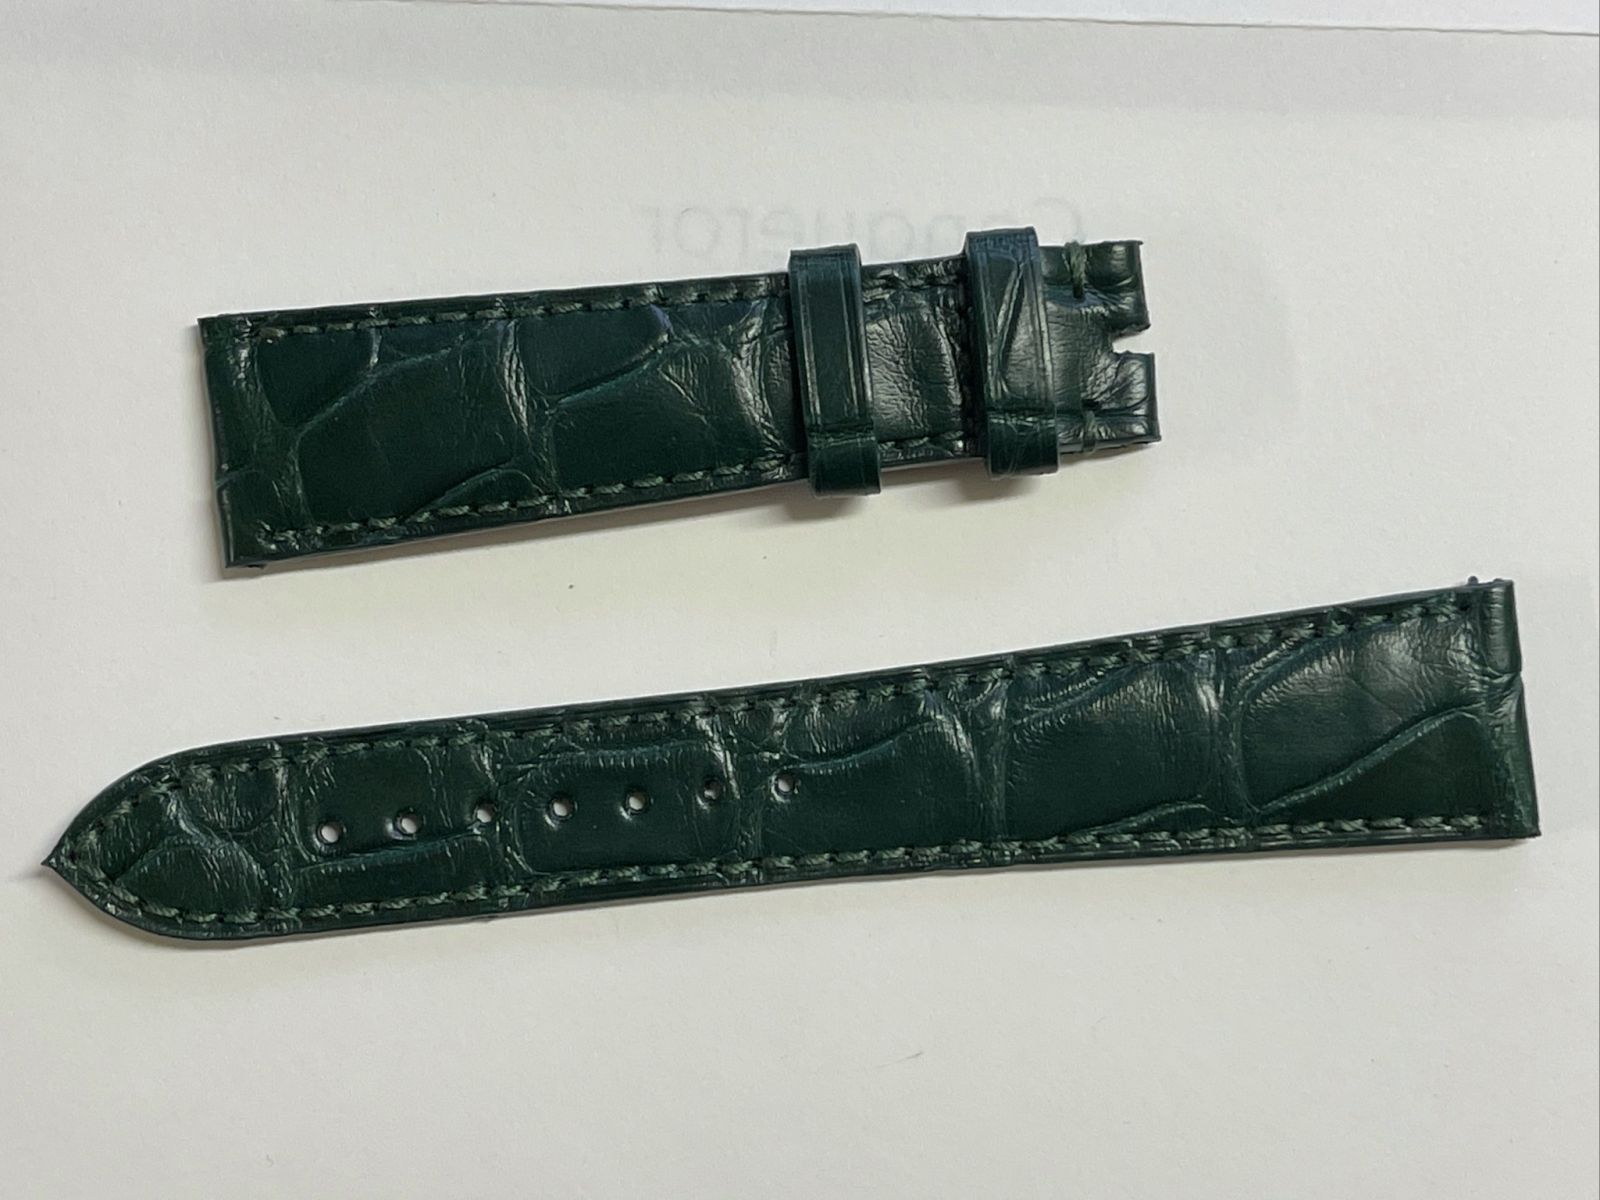 Emerald Green Alligator leather strap 20mm Rolex Oyster style